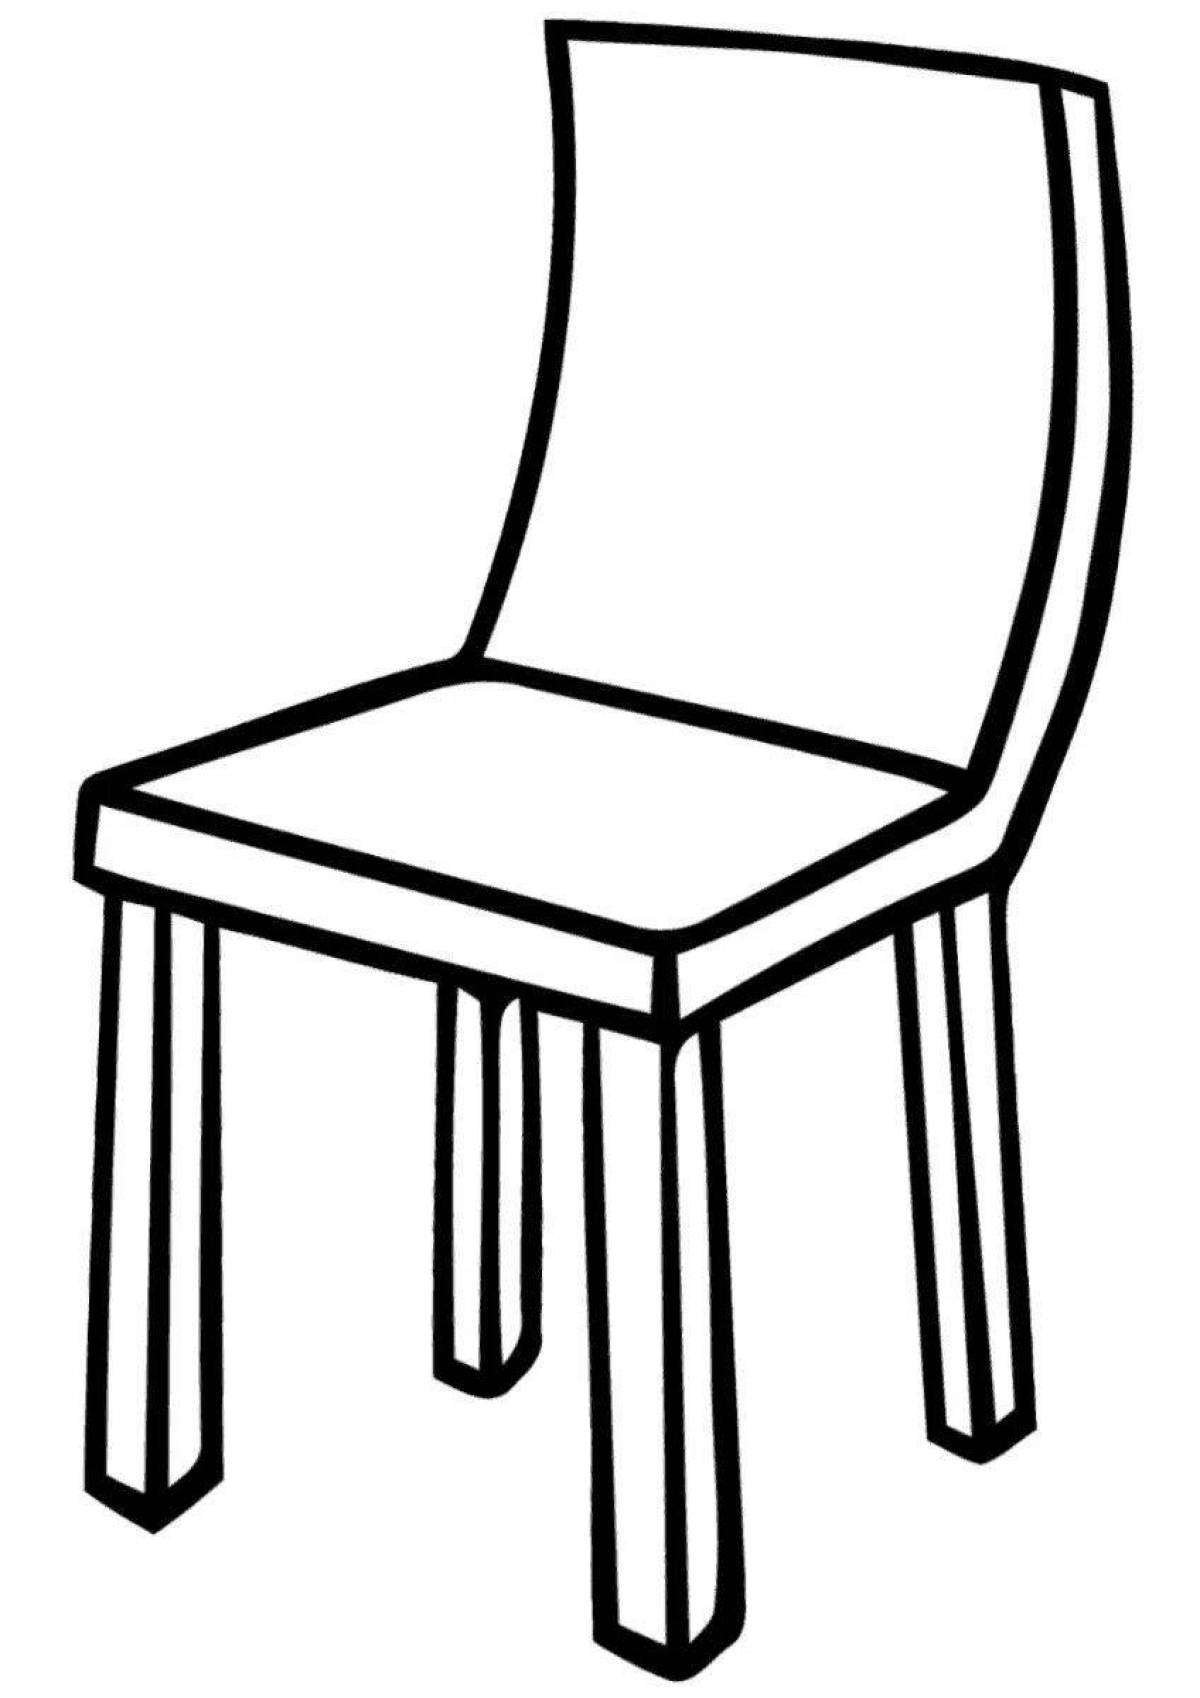 Coloring book cheerful chair